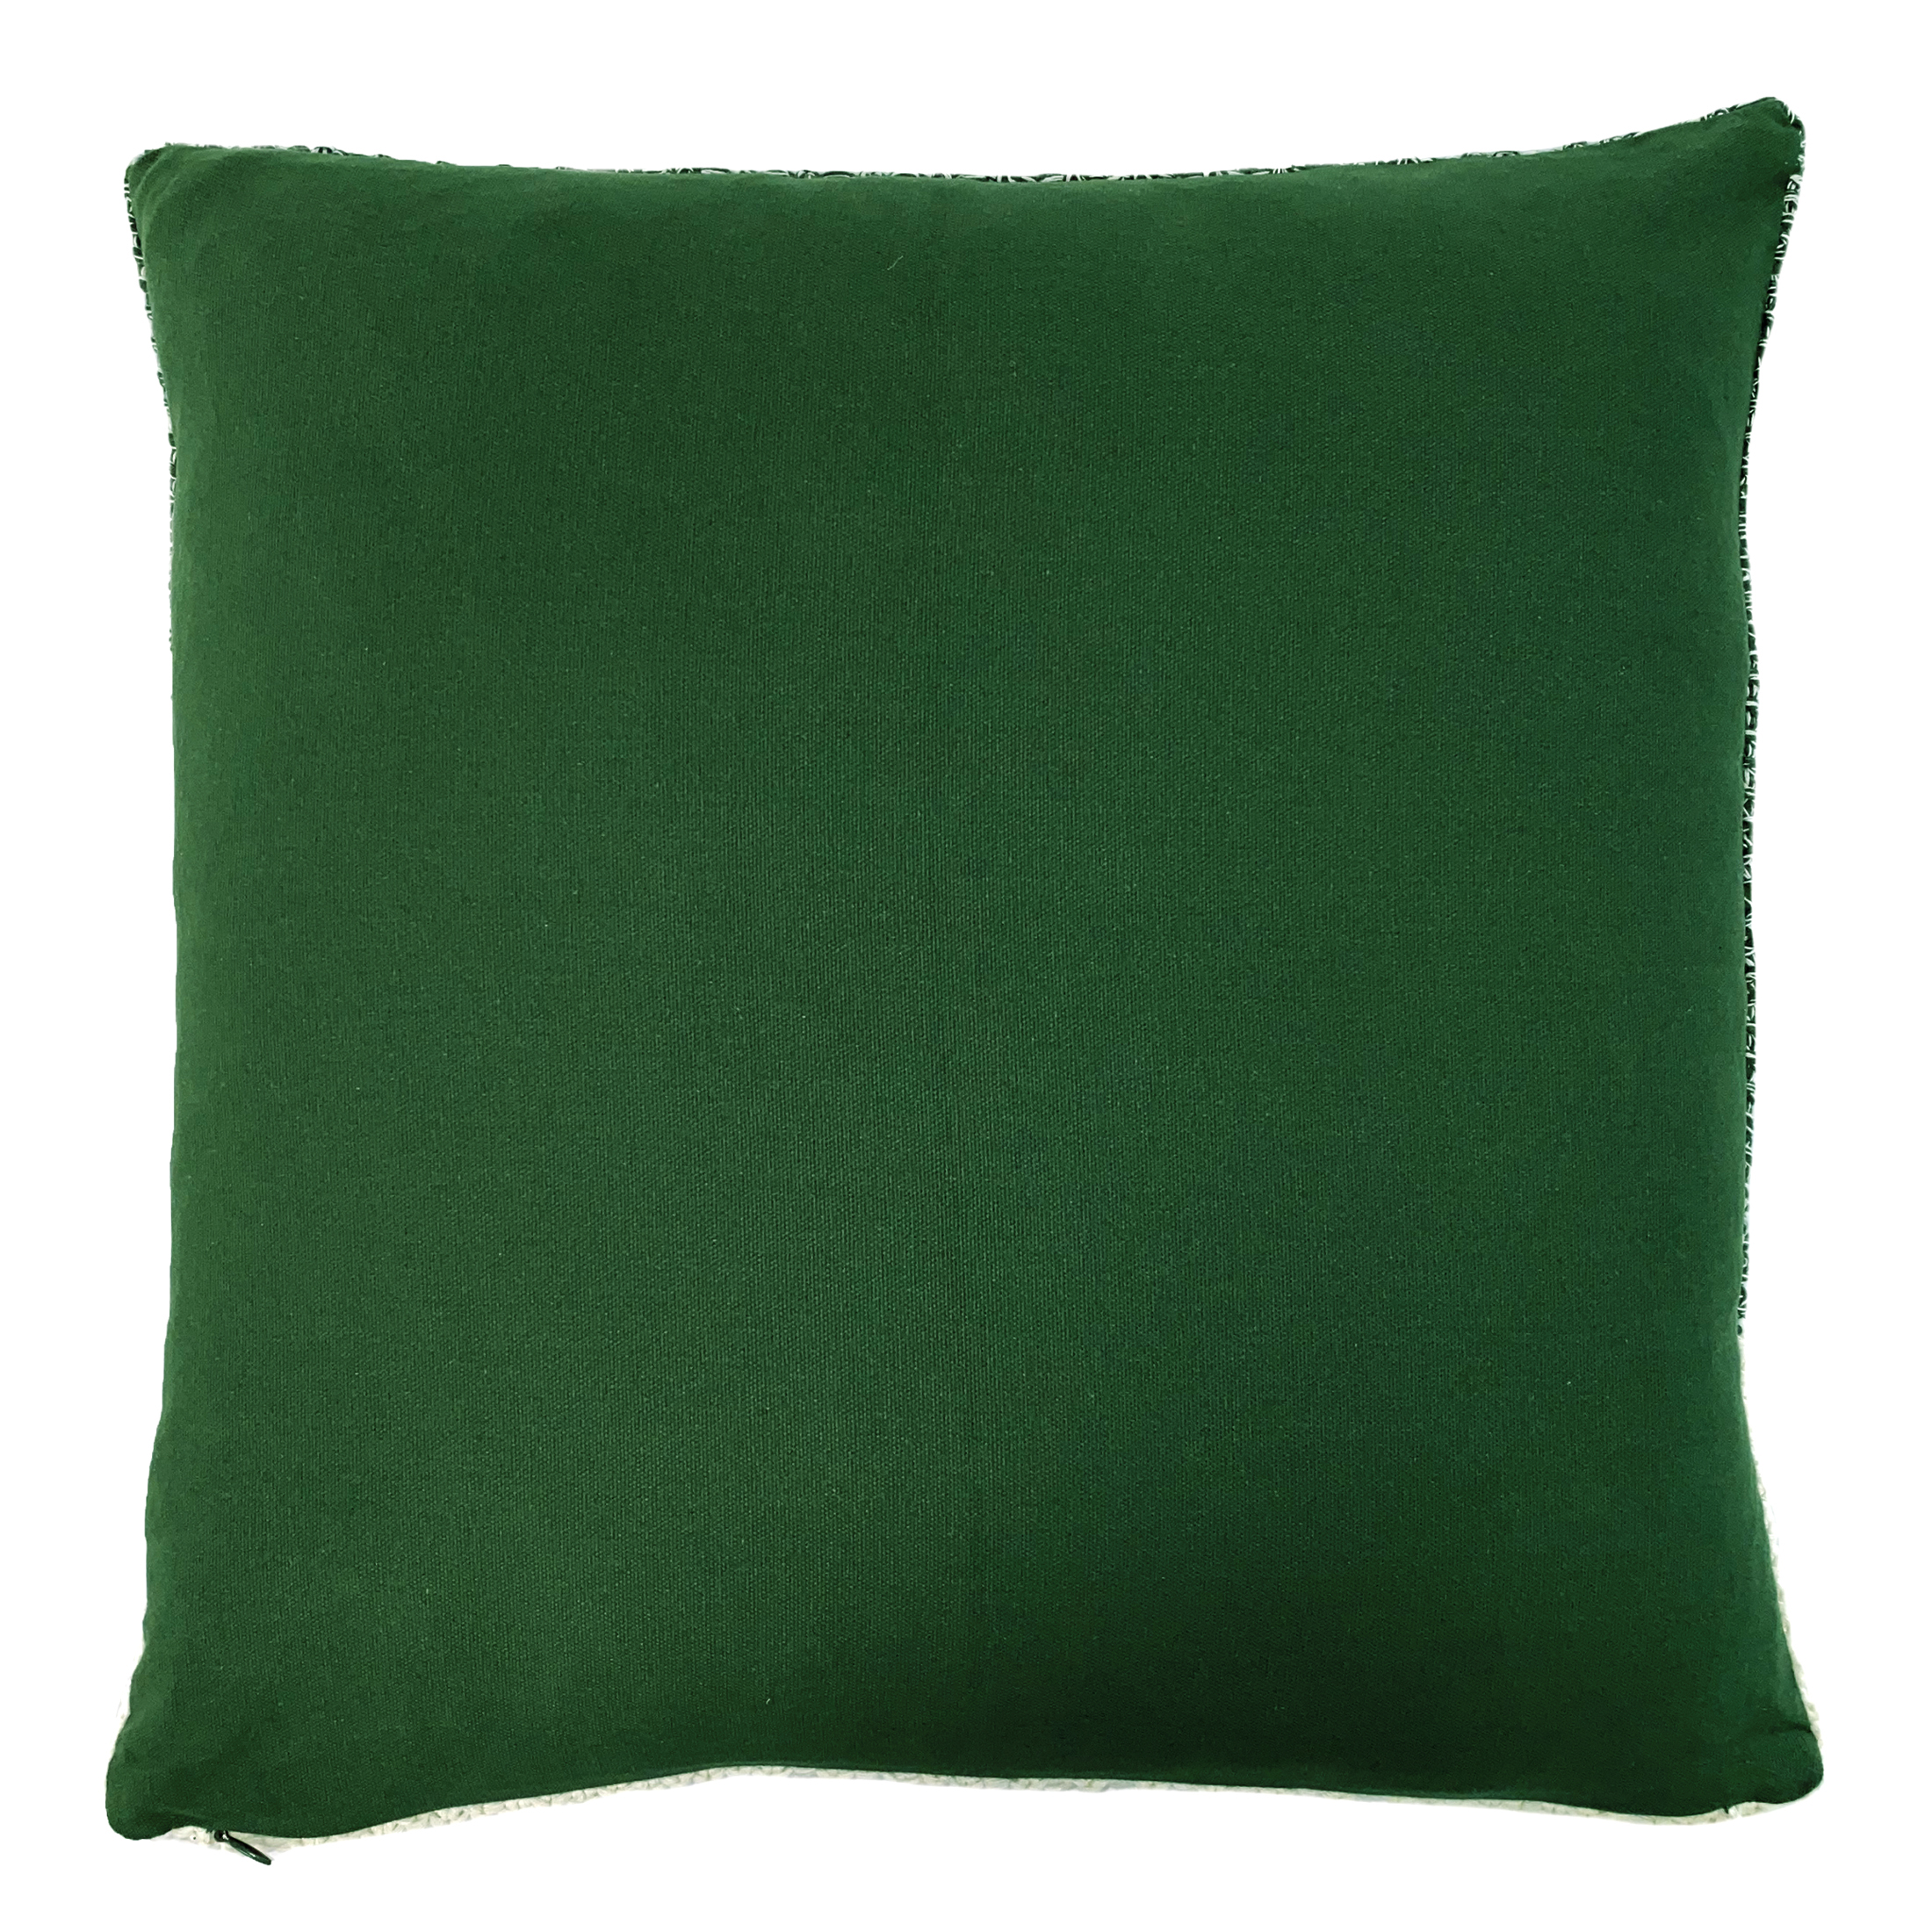 My Texas House Cassia Sweater Knit Square Decorative Pillow Cover, 18" x 18", Green - image 4 of 5